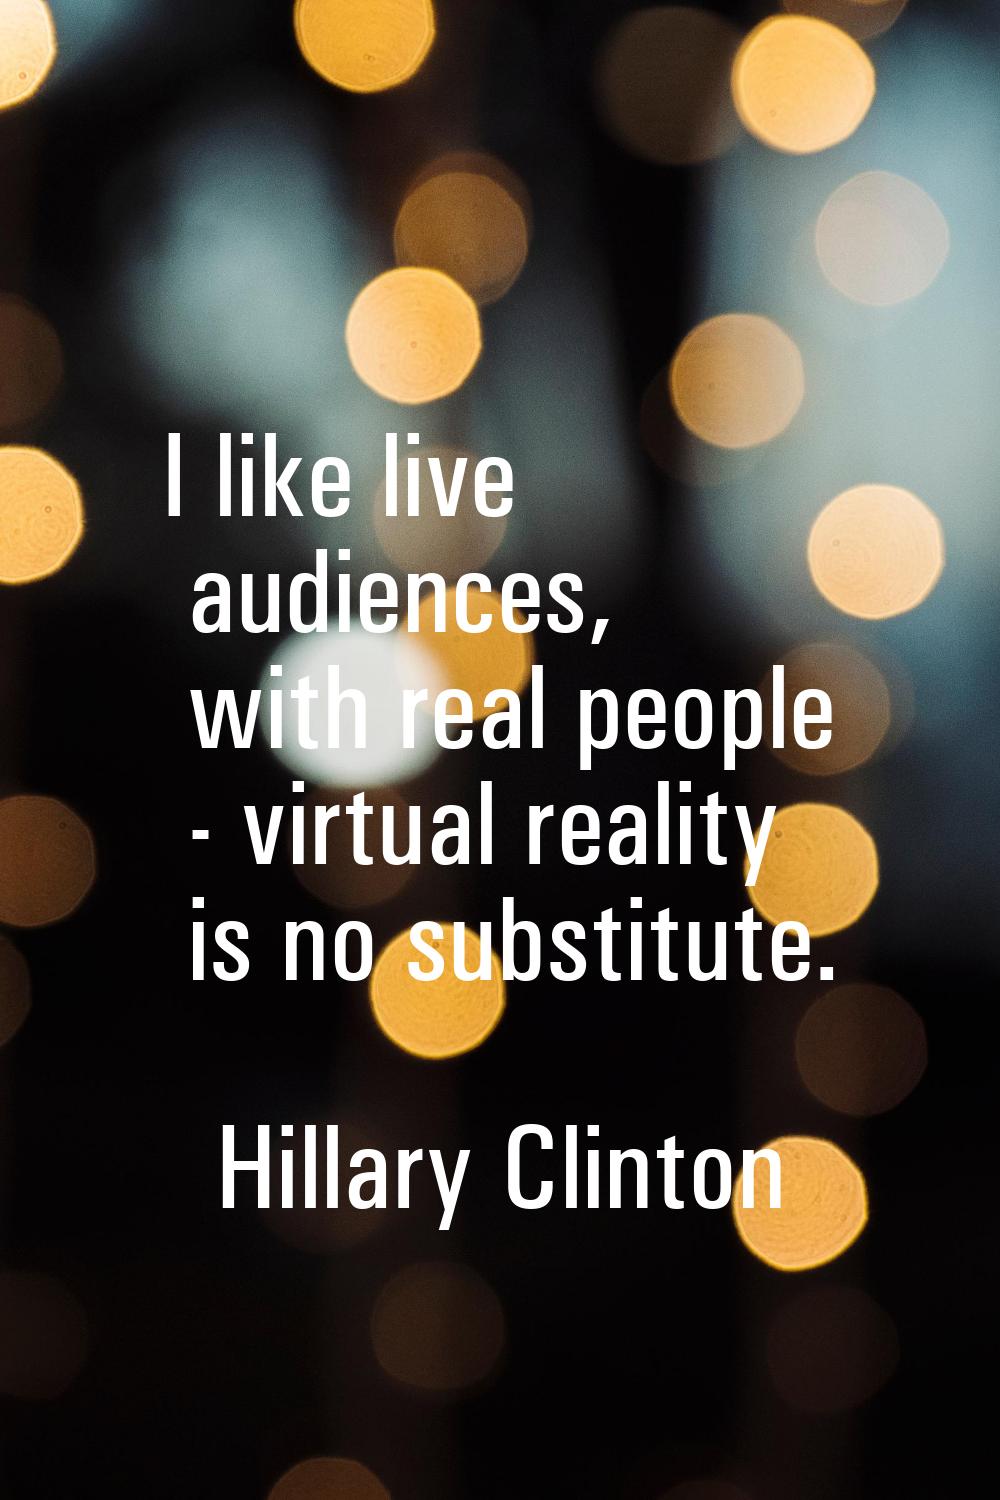 I like live audiences, with real people - virtual reality is no substitute.